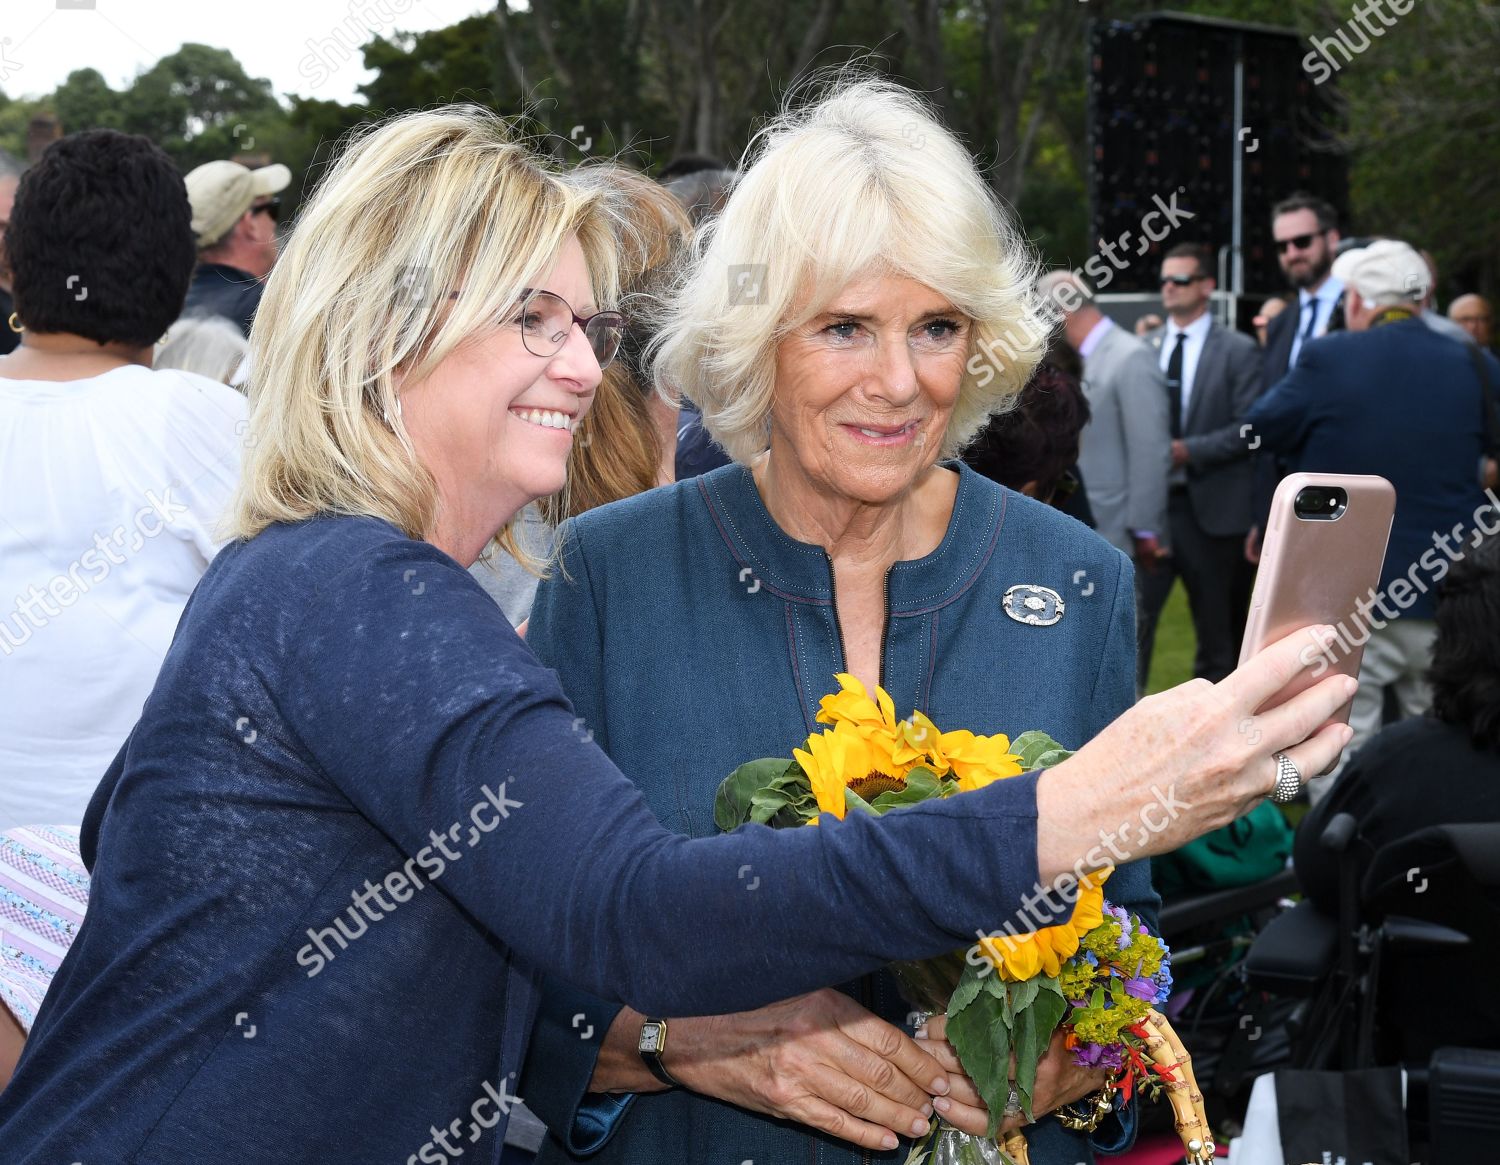 prince-charles-and-camilla-duchess-of-cornwall-visit-to-new-zealand-shutterstock-editorial-10480133bu.jpg